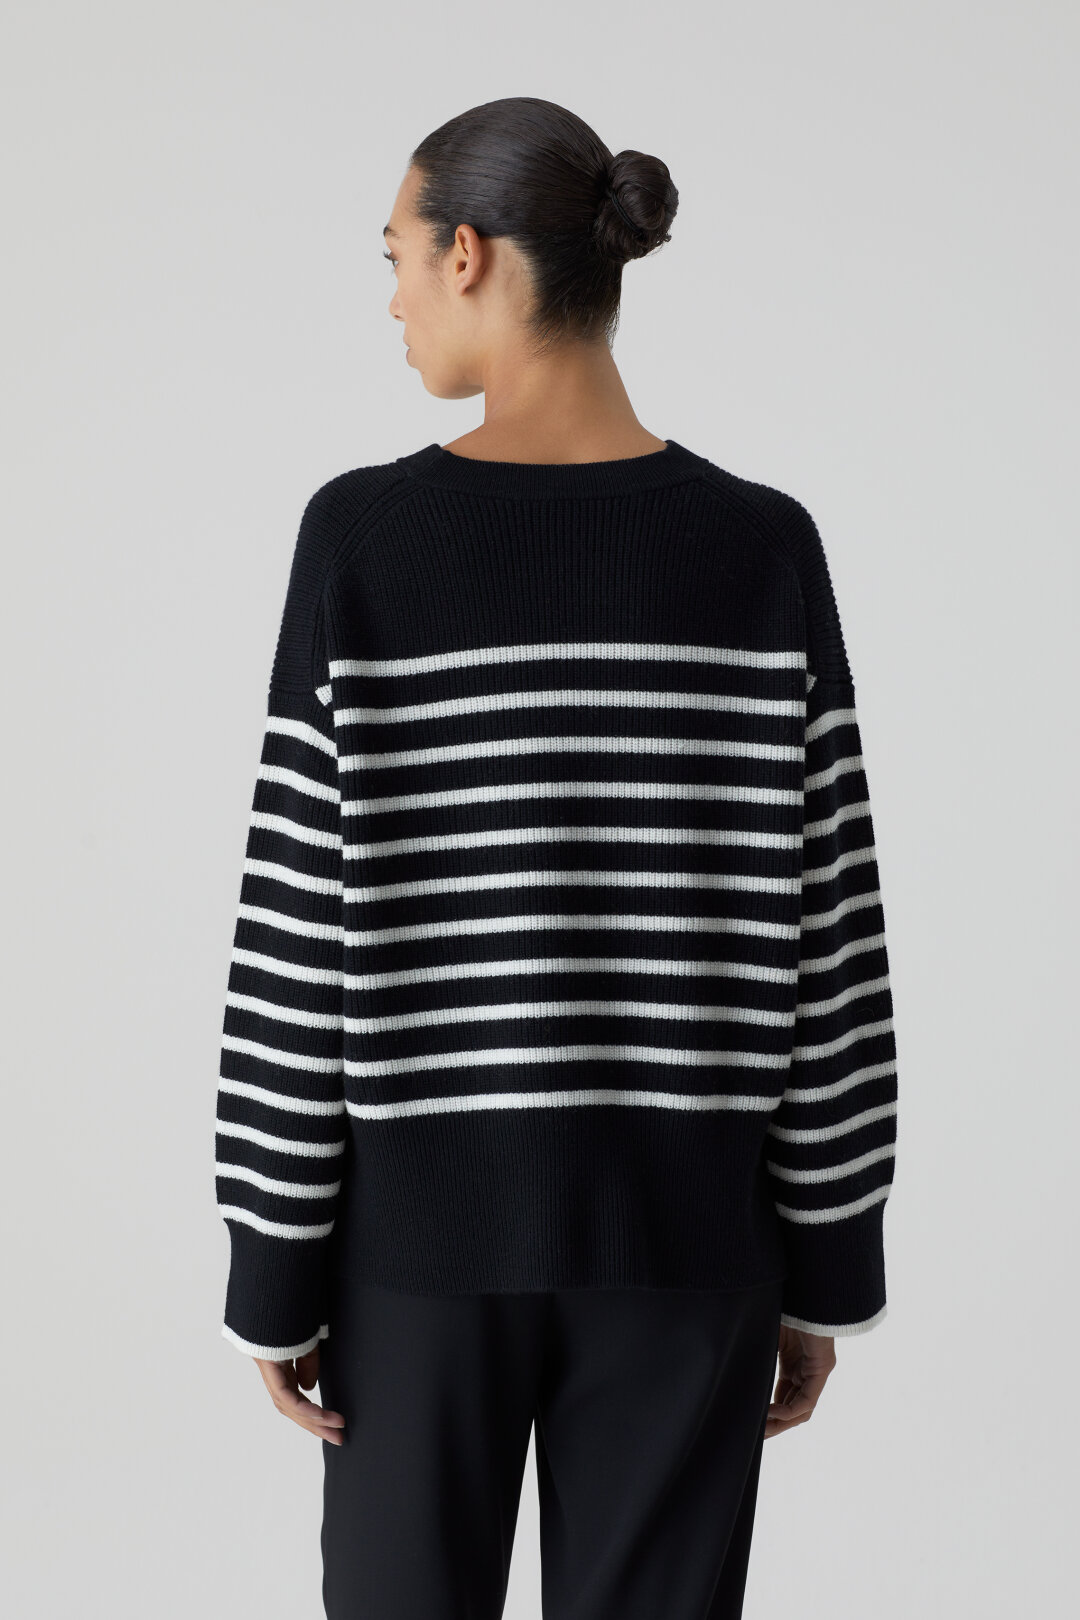 Closed Knit Pullover in Navy Stripe